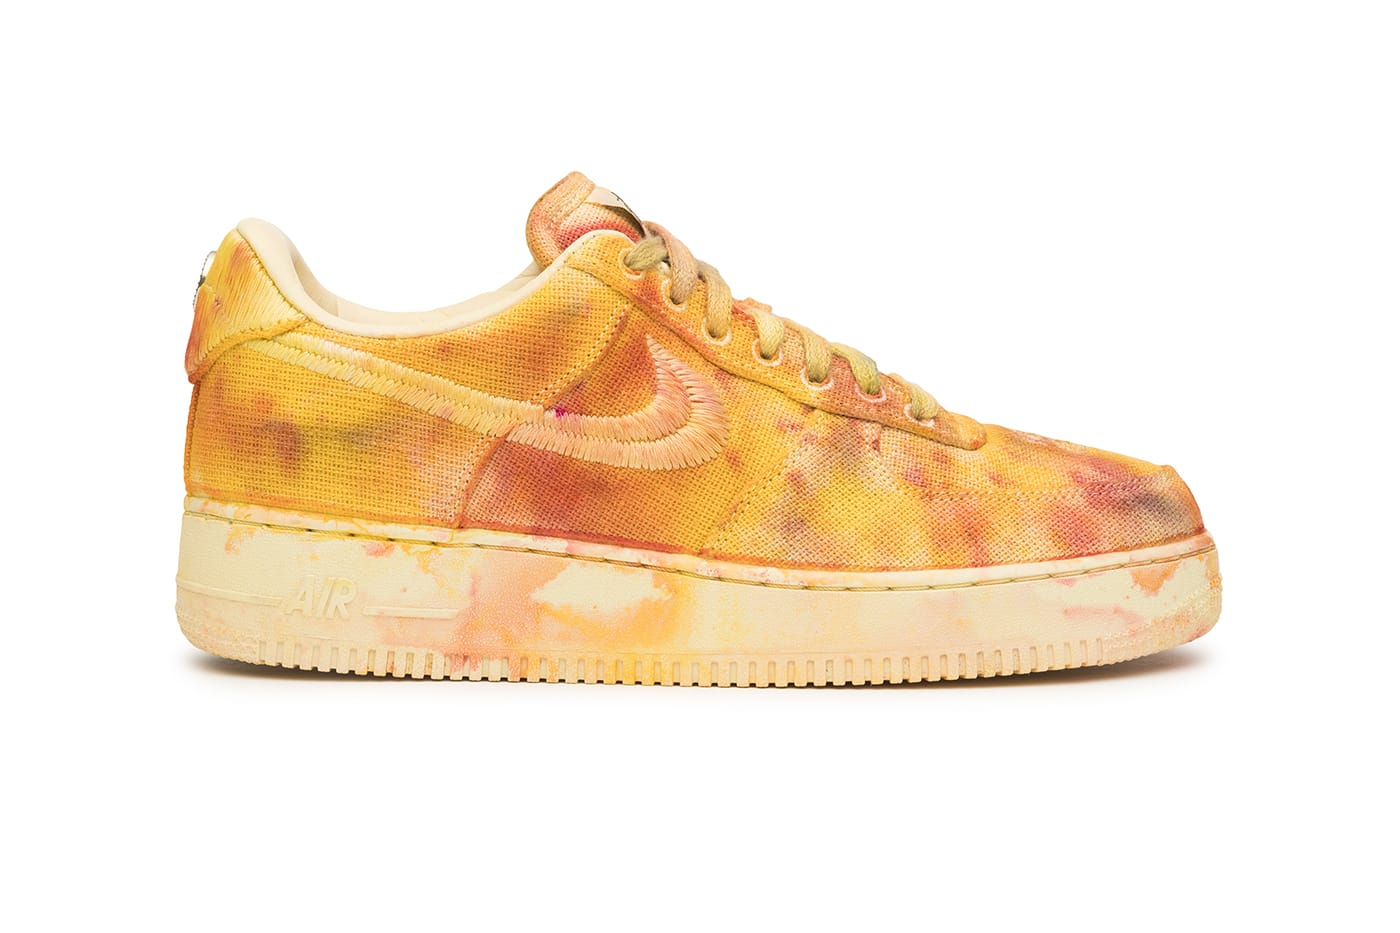 Stüssy x Nike Hand-Dyed Air Force 1 